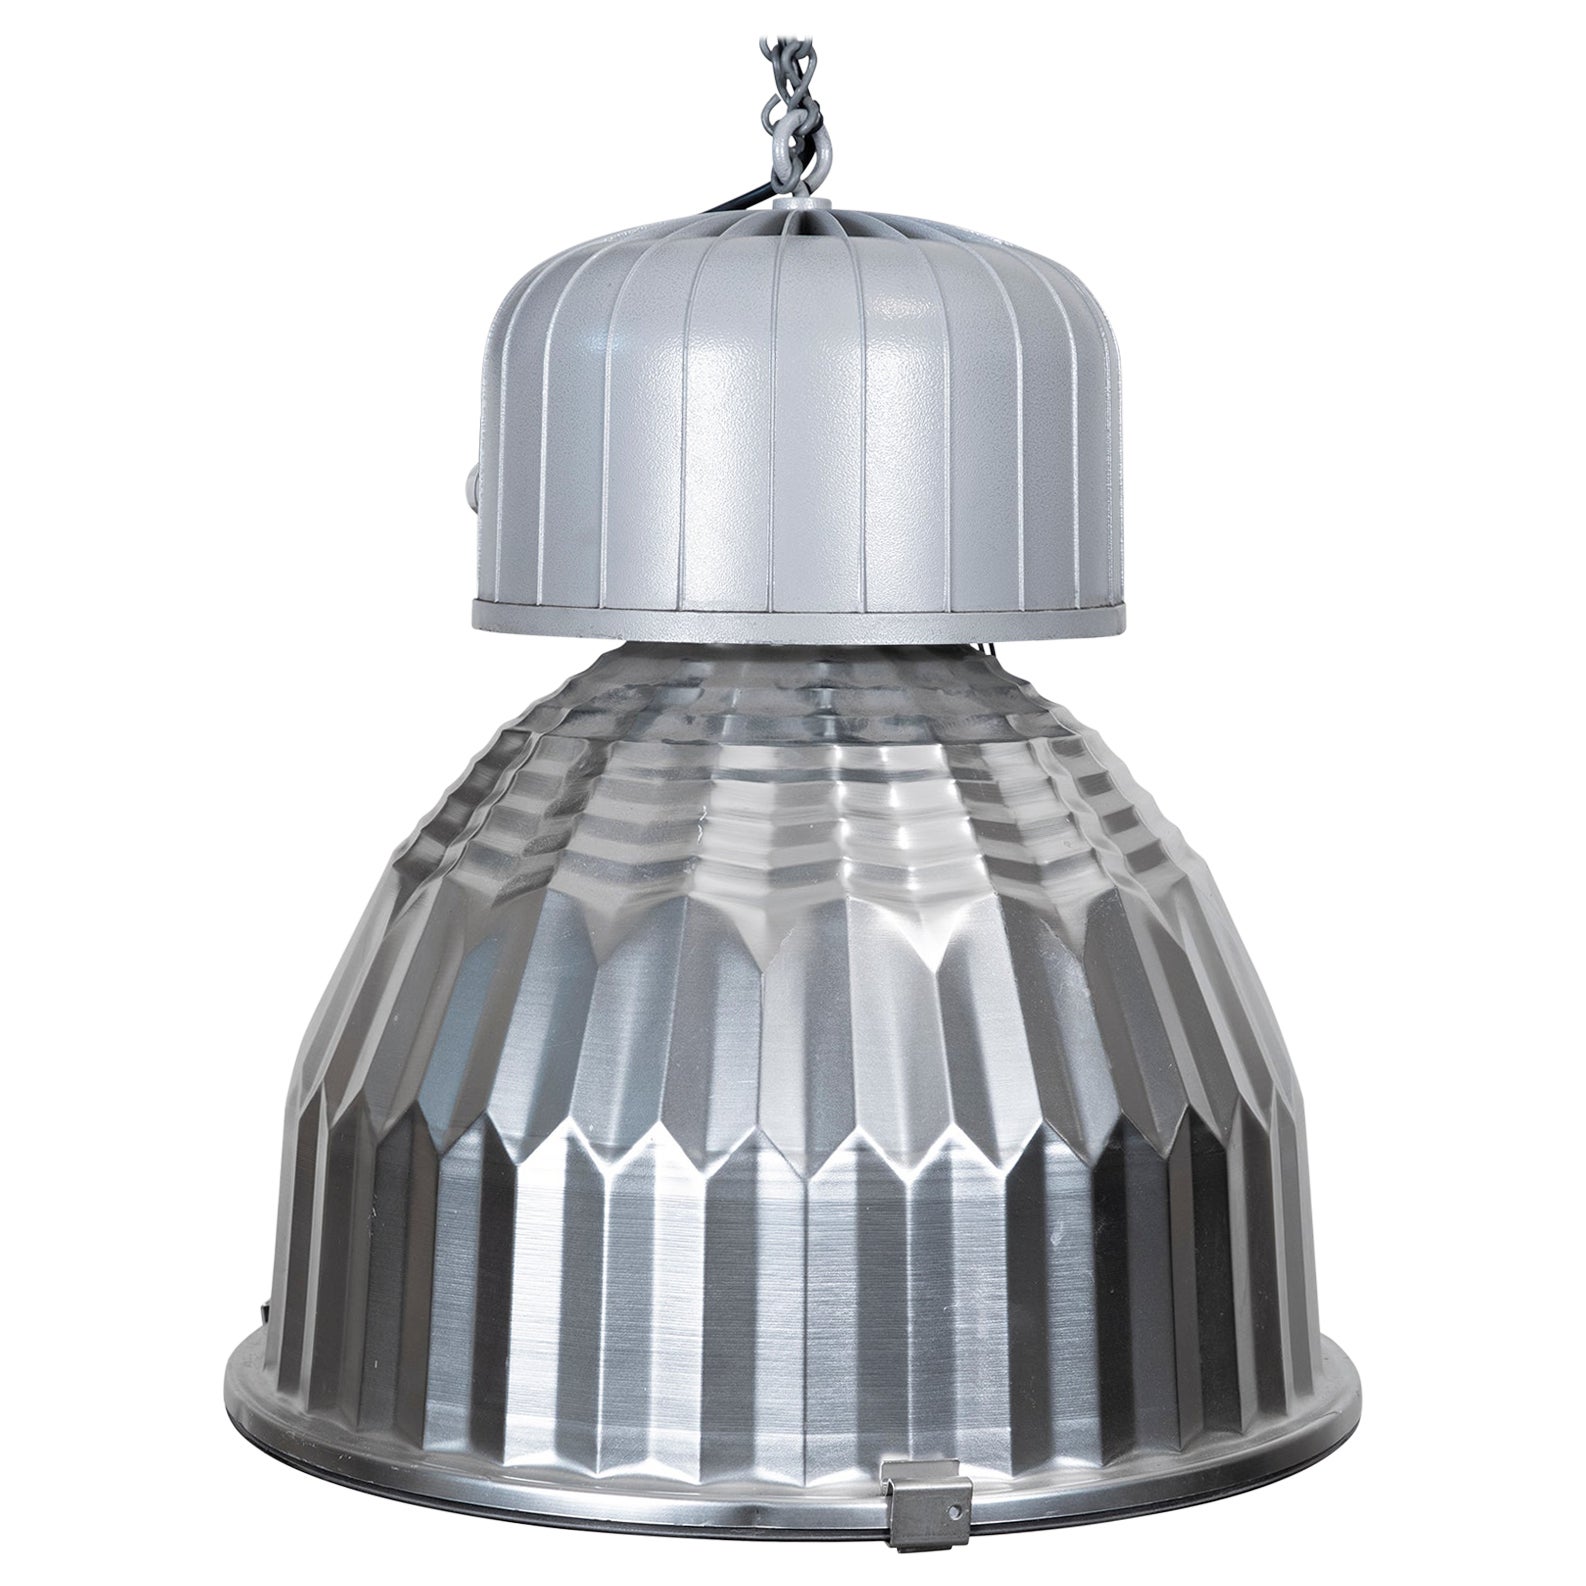 Italian Lanzini Industrial Tempered Glass Ceiling Lights For Sale